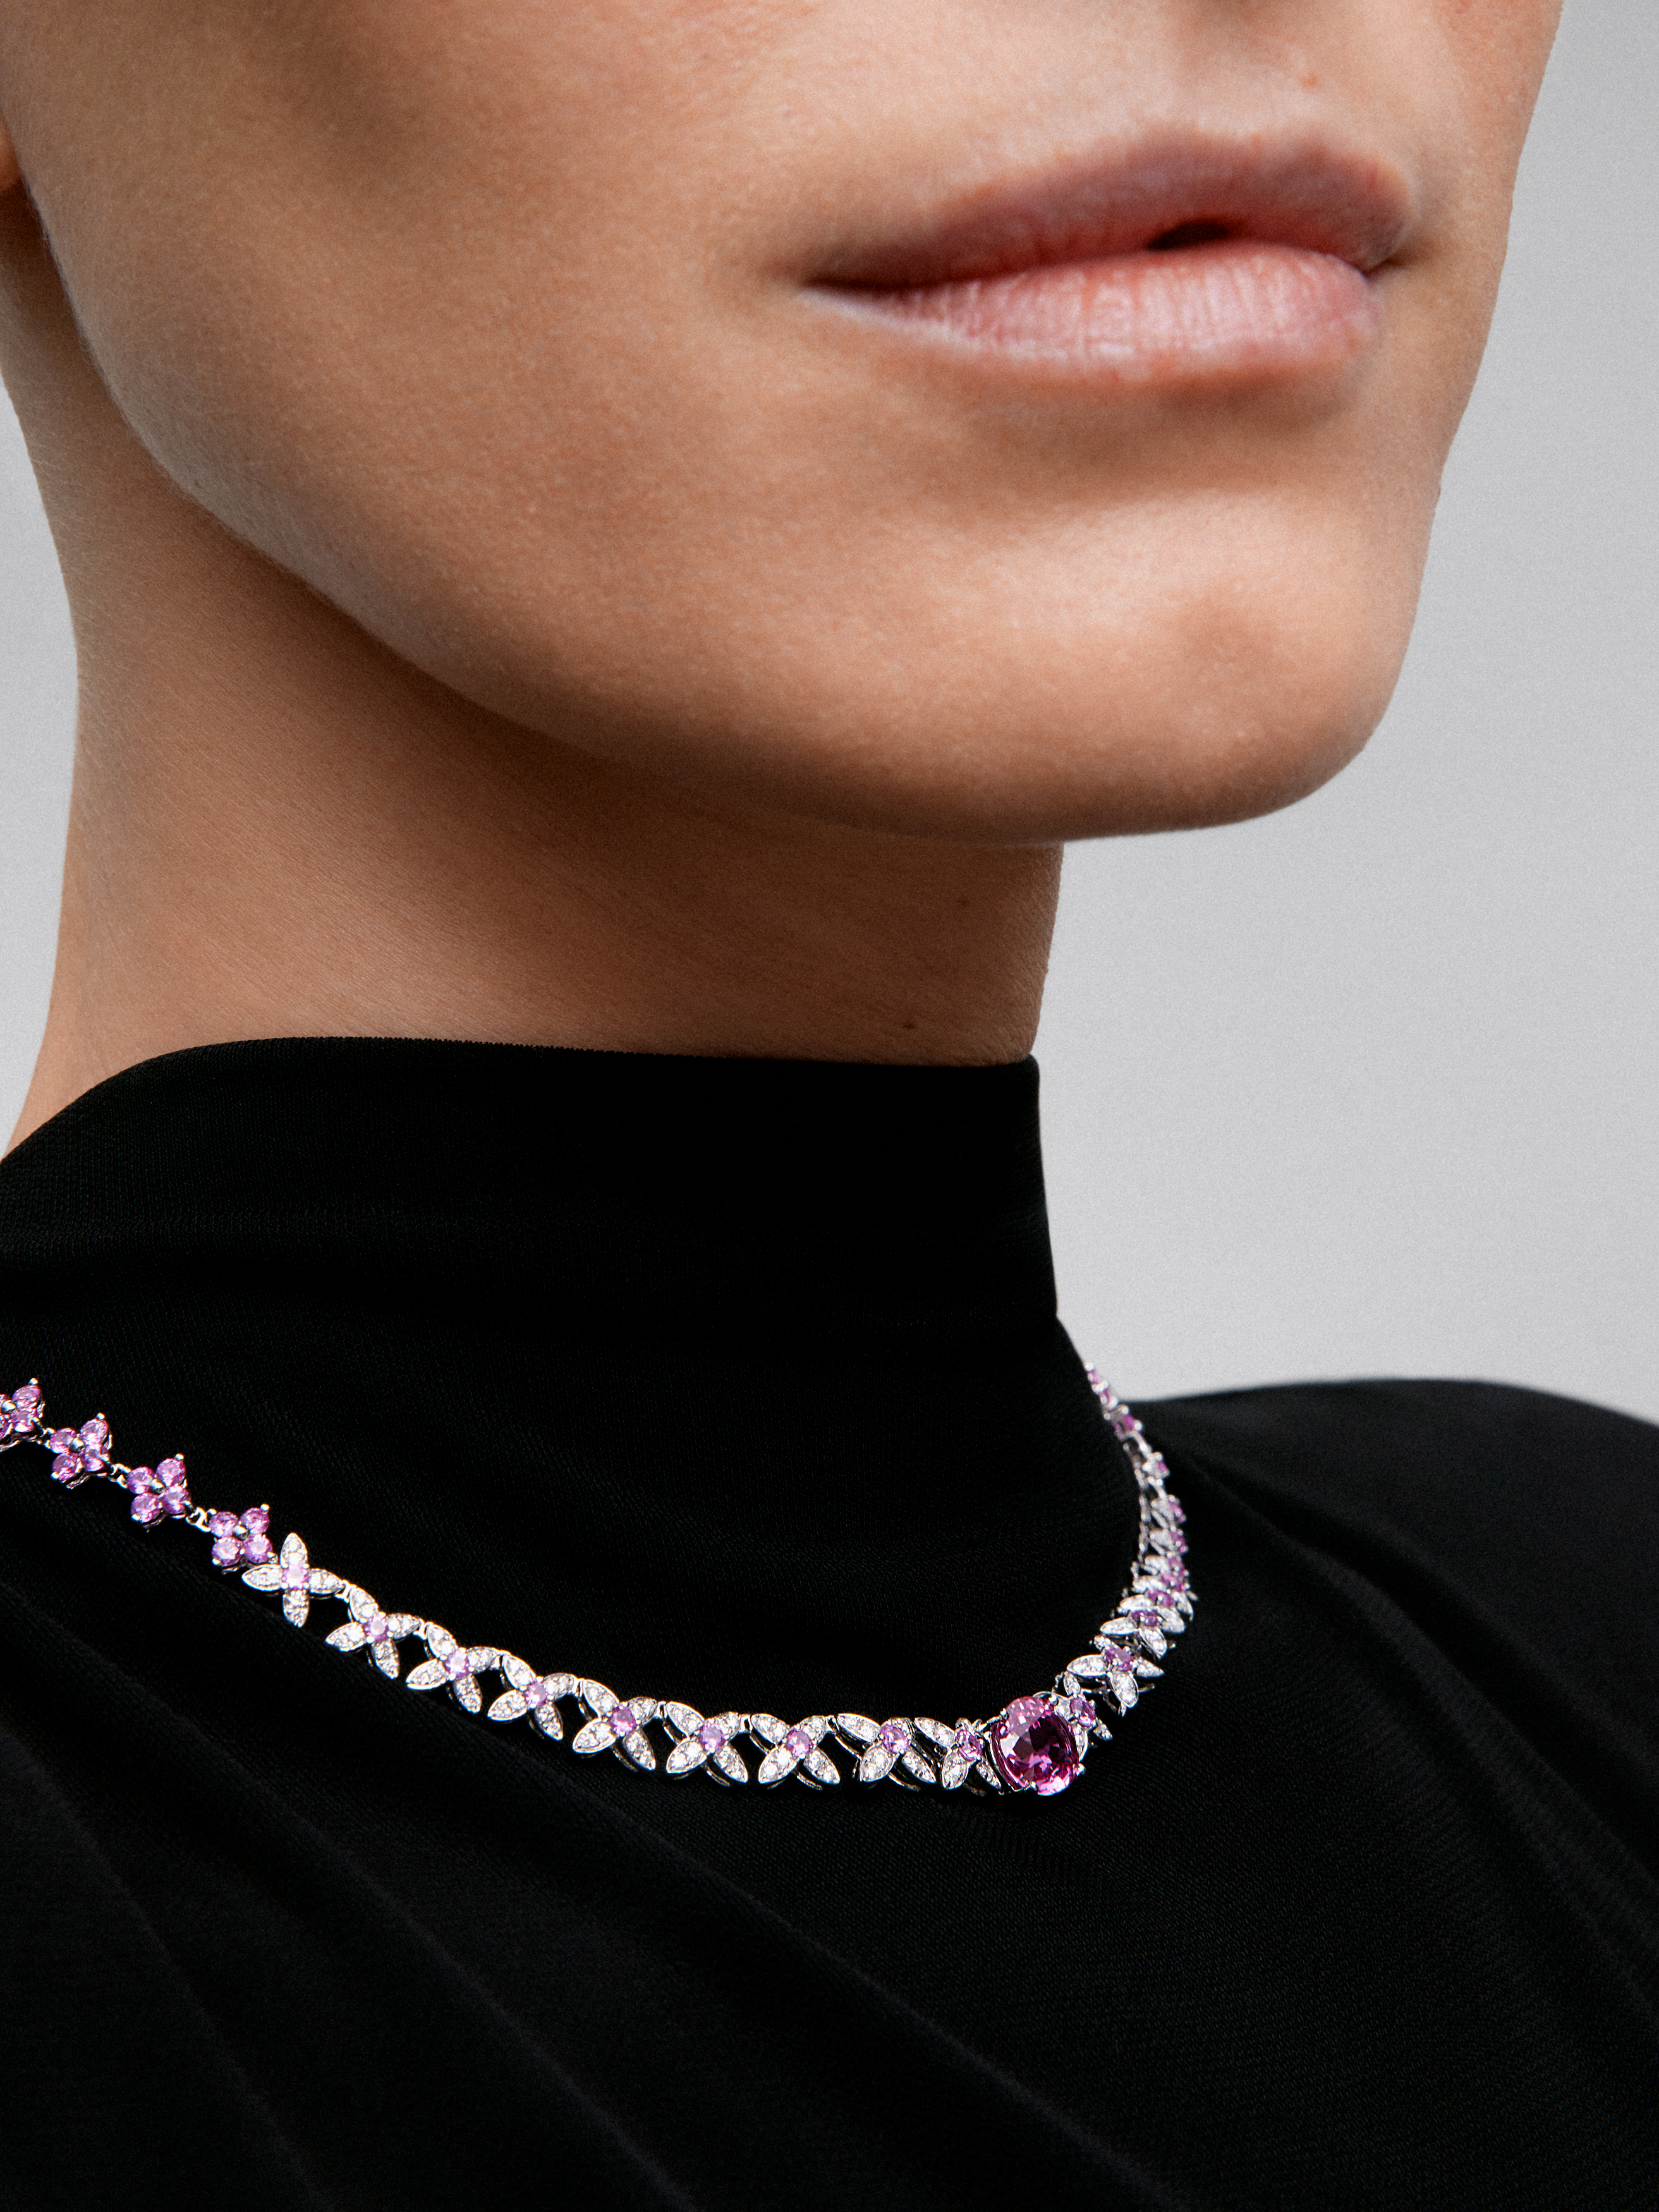 18K white gold necklace with pink sapphries in 15.02 cts and white diamonds in a brilliant 1.52 cts white diamonds